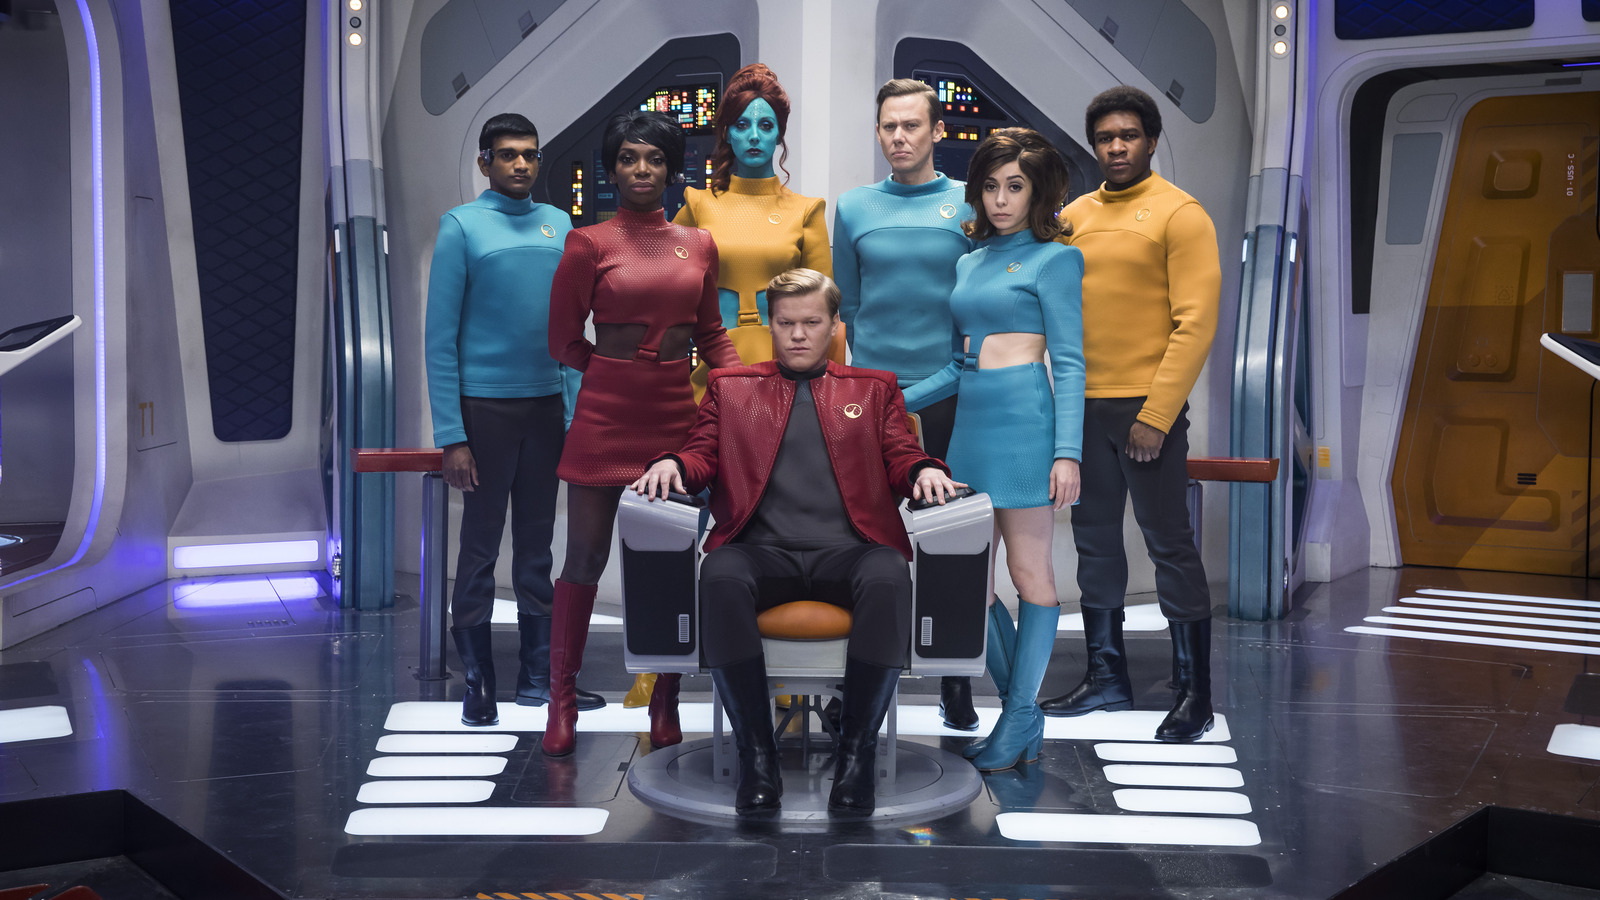 Netflix Orders Black Mirror Season 7, With A Sequel To One Of Its Best Episodes